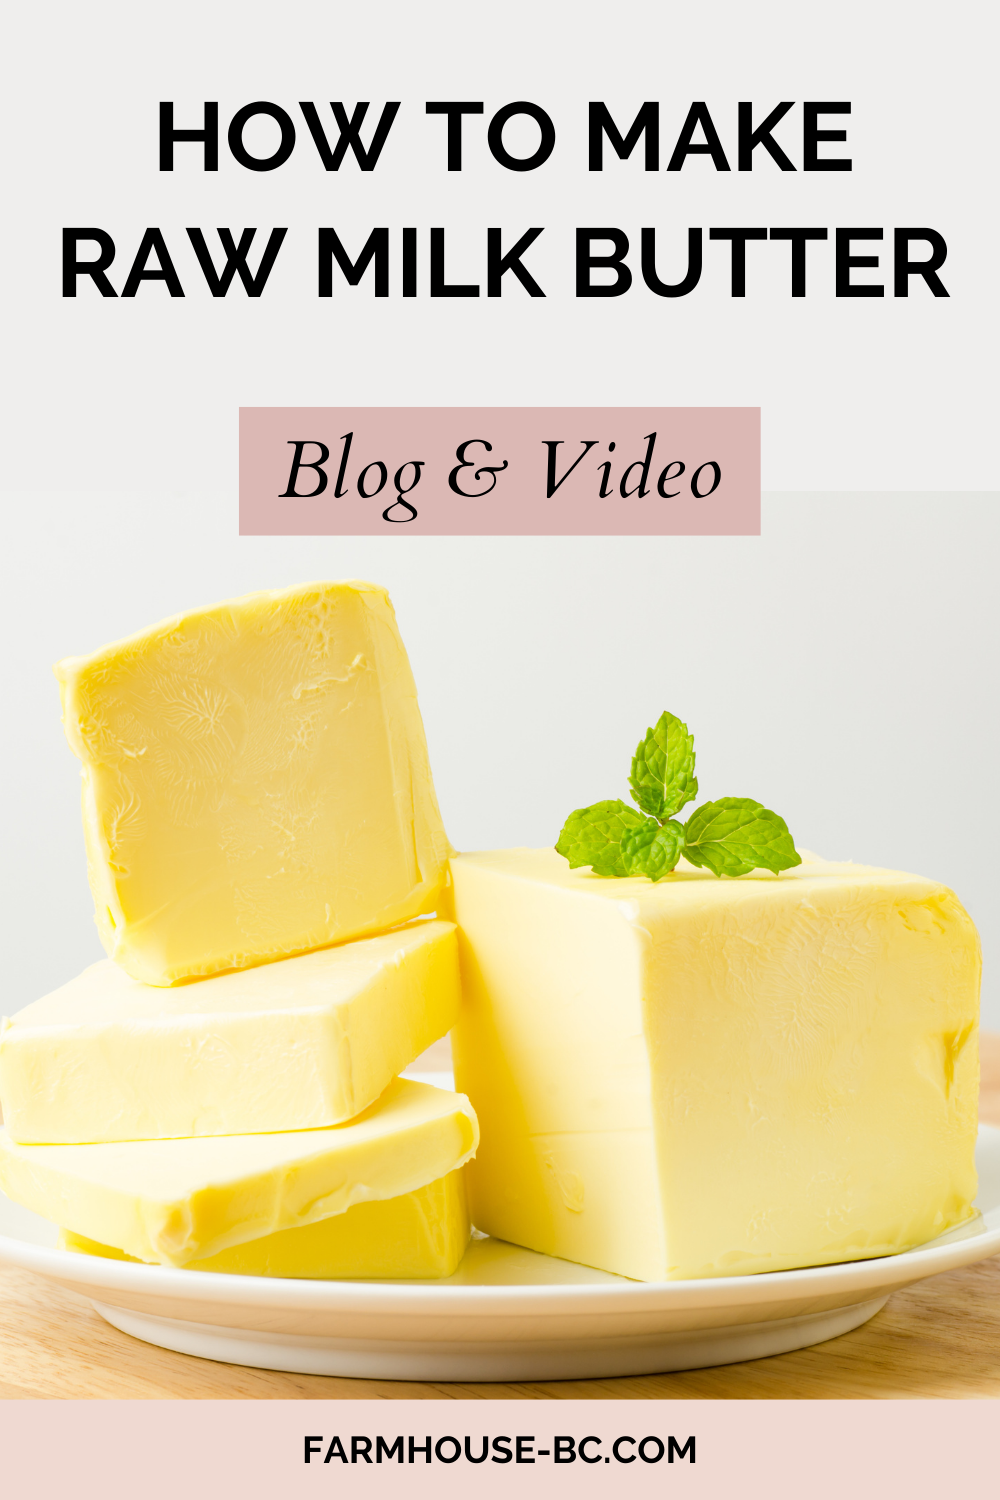 How to Make Raw Milk Butter